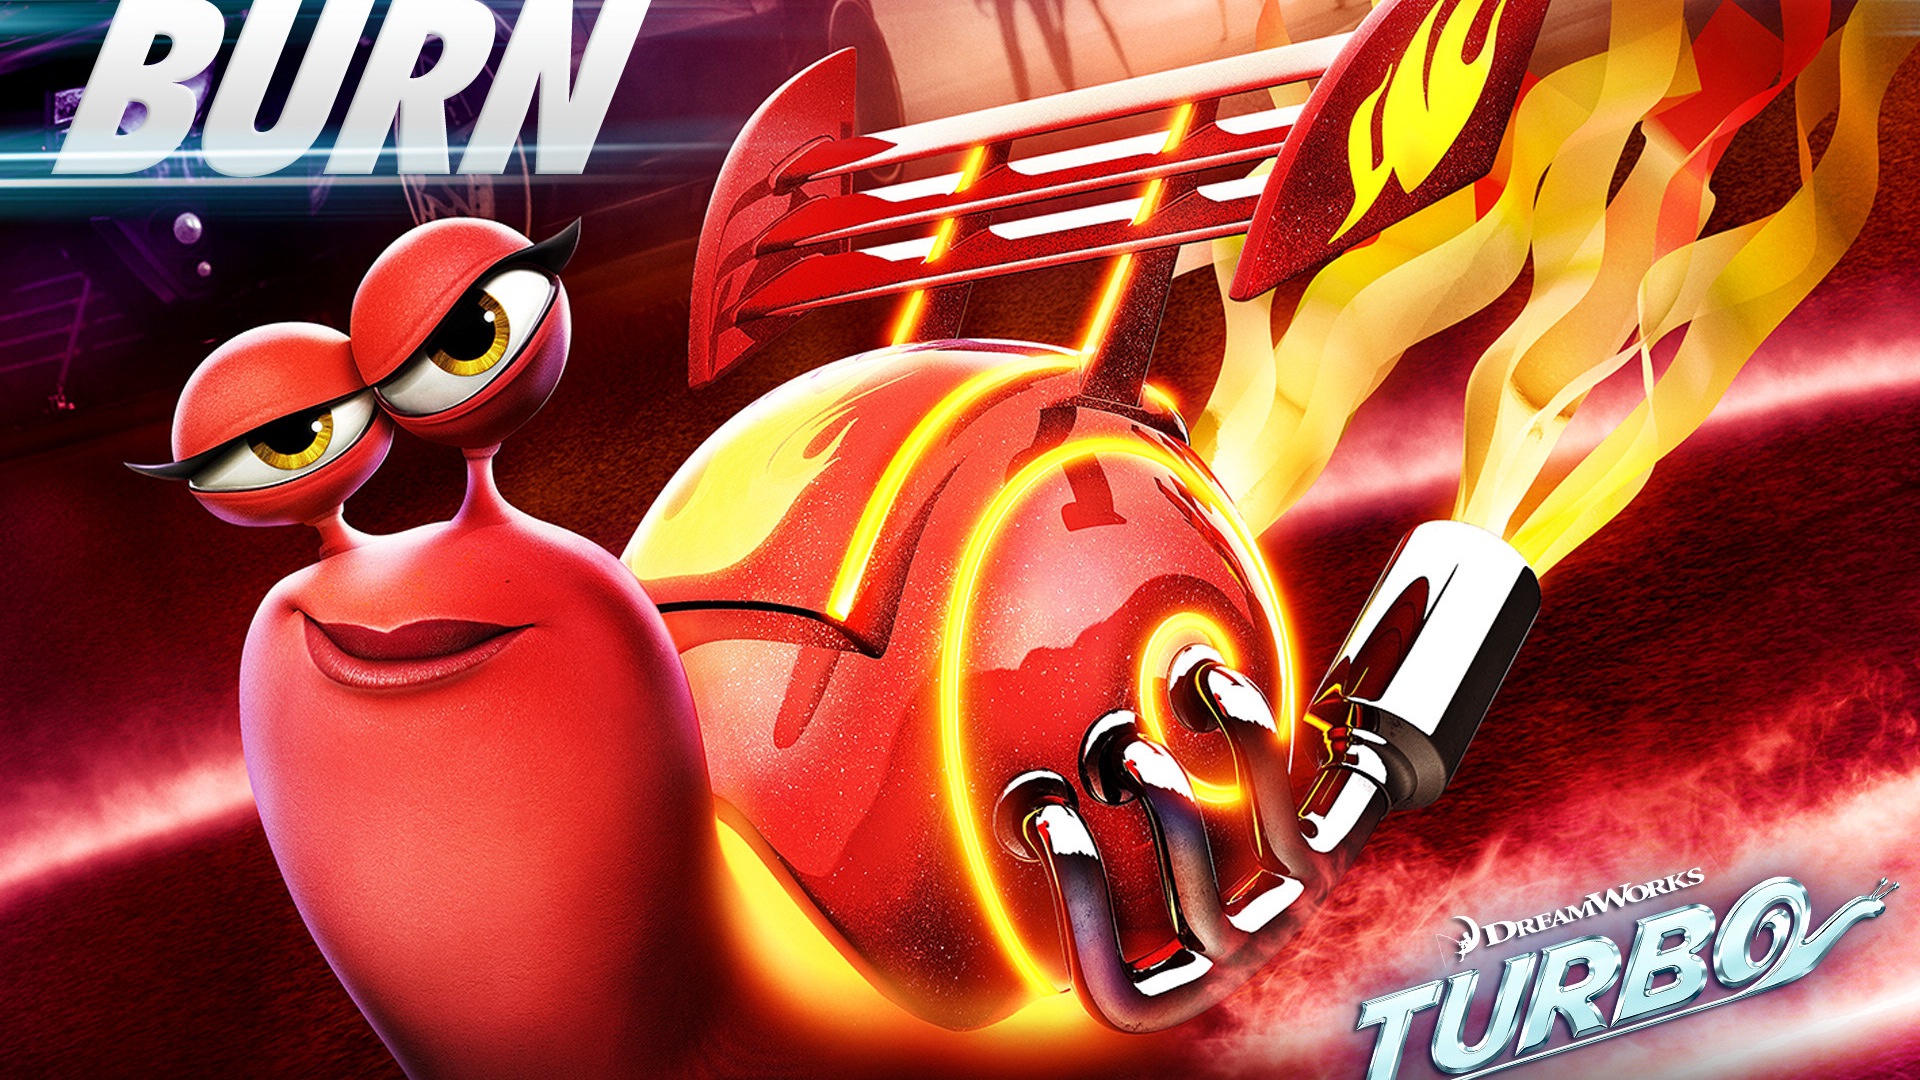 Turbo 3D movie HD wallpapers #7 - 1920x1080